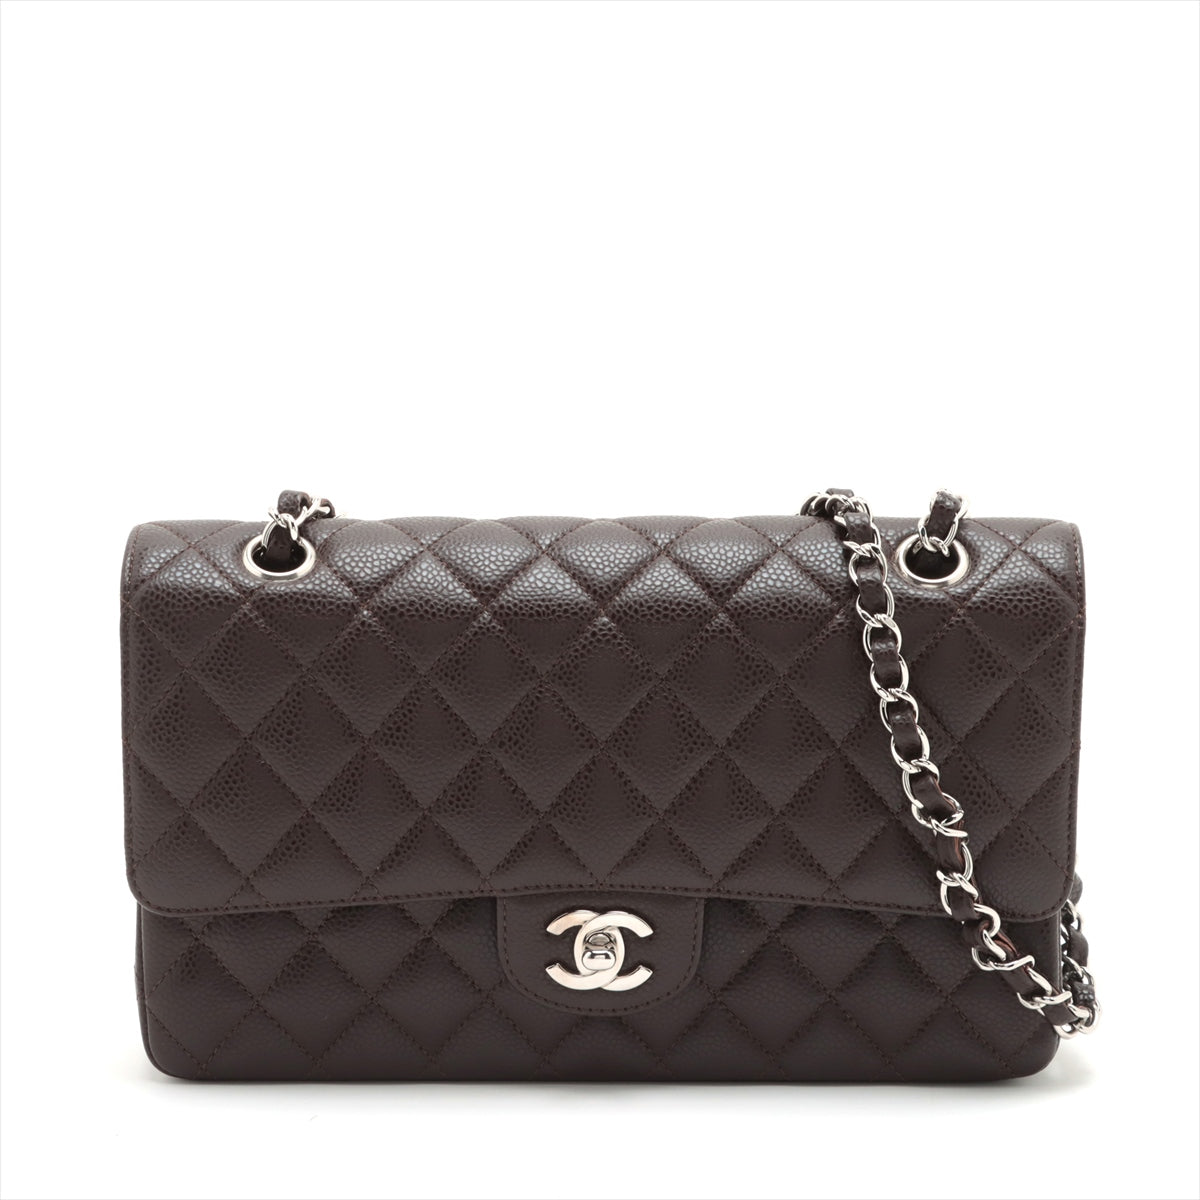 Chanel Matelasse25 Caviarskin Double flap Double chain bag Brown Silver Metal fittings 10XXXXXX A01112